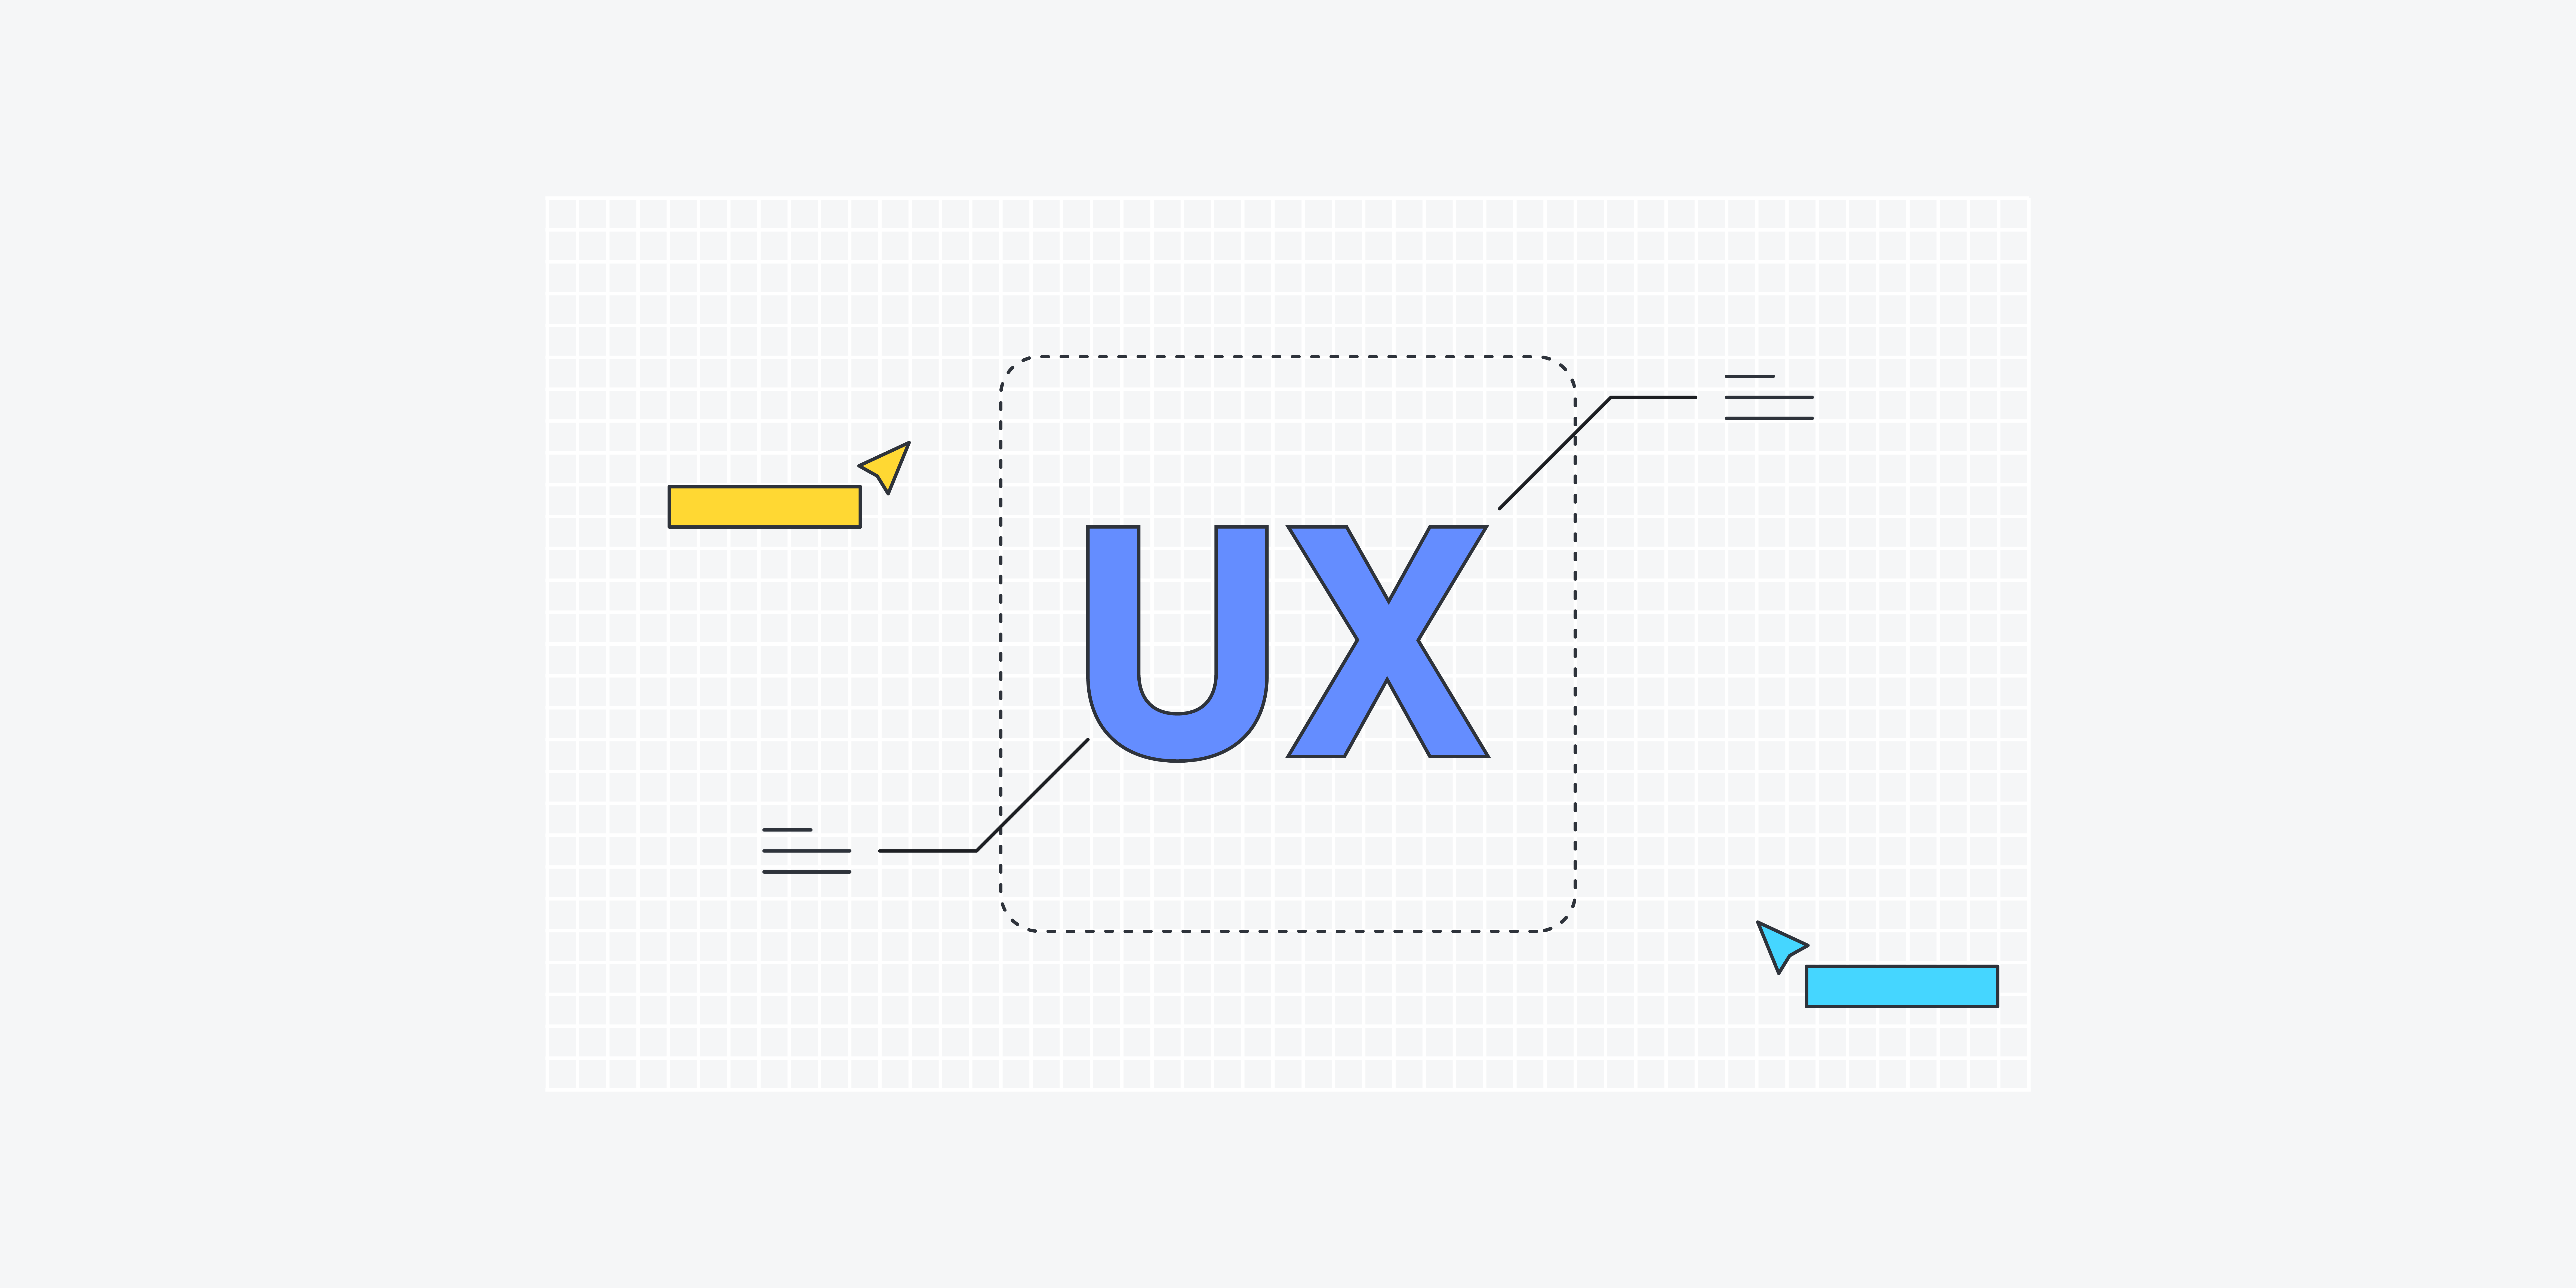 What does UX stand for and what does it mean?